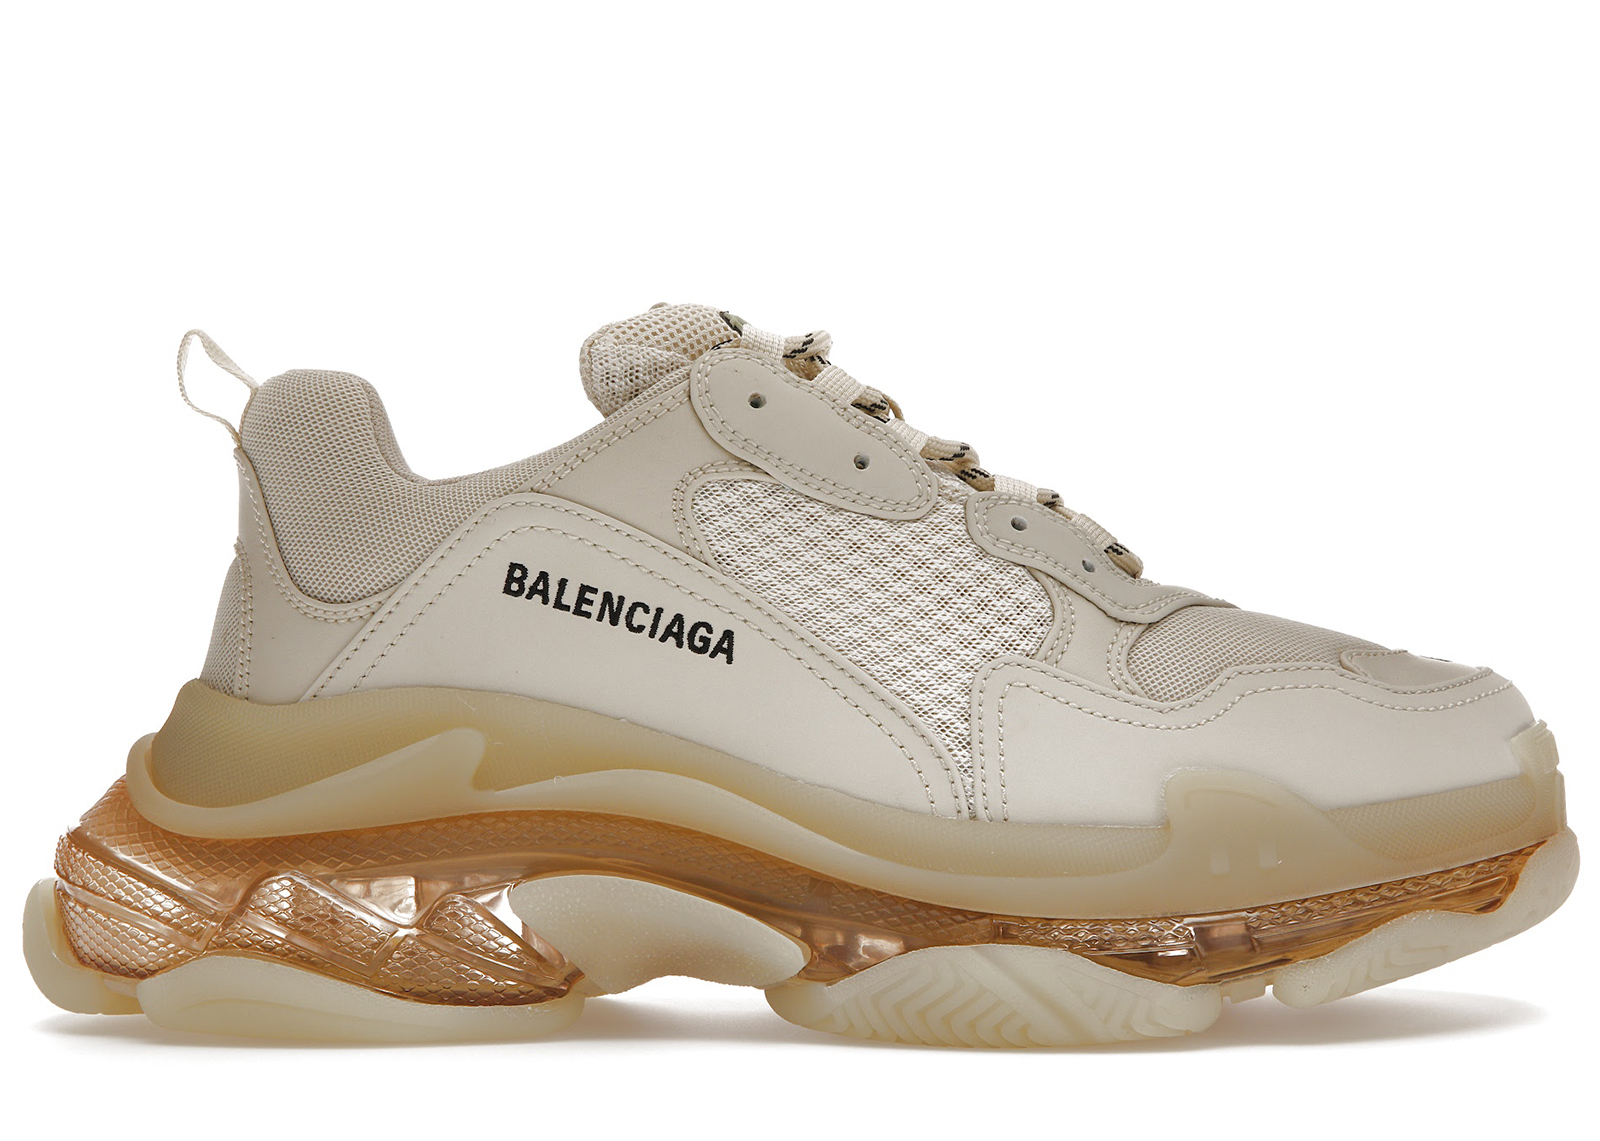 Chinese consumers divided over Balenciagas Made in China revelation   South China Morning Post